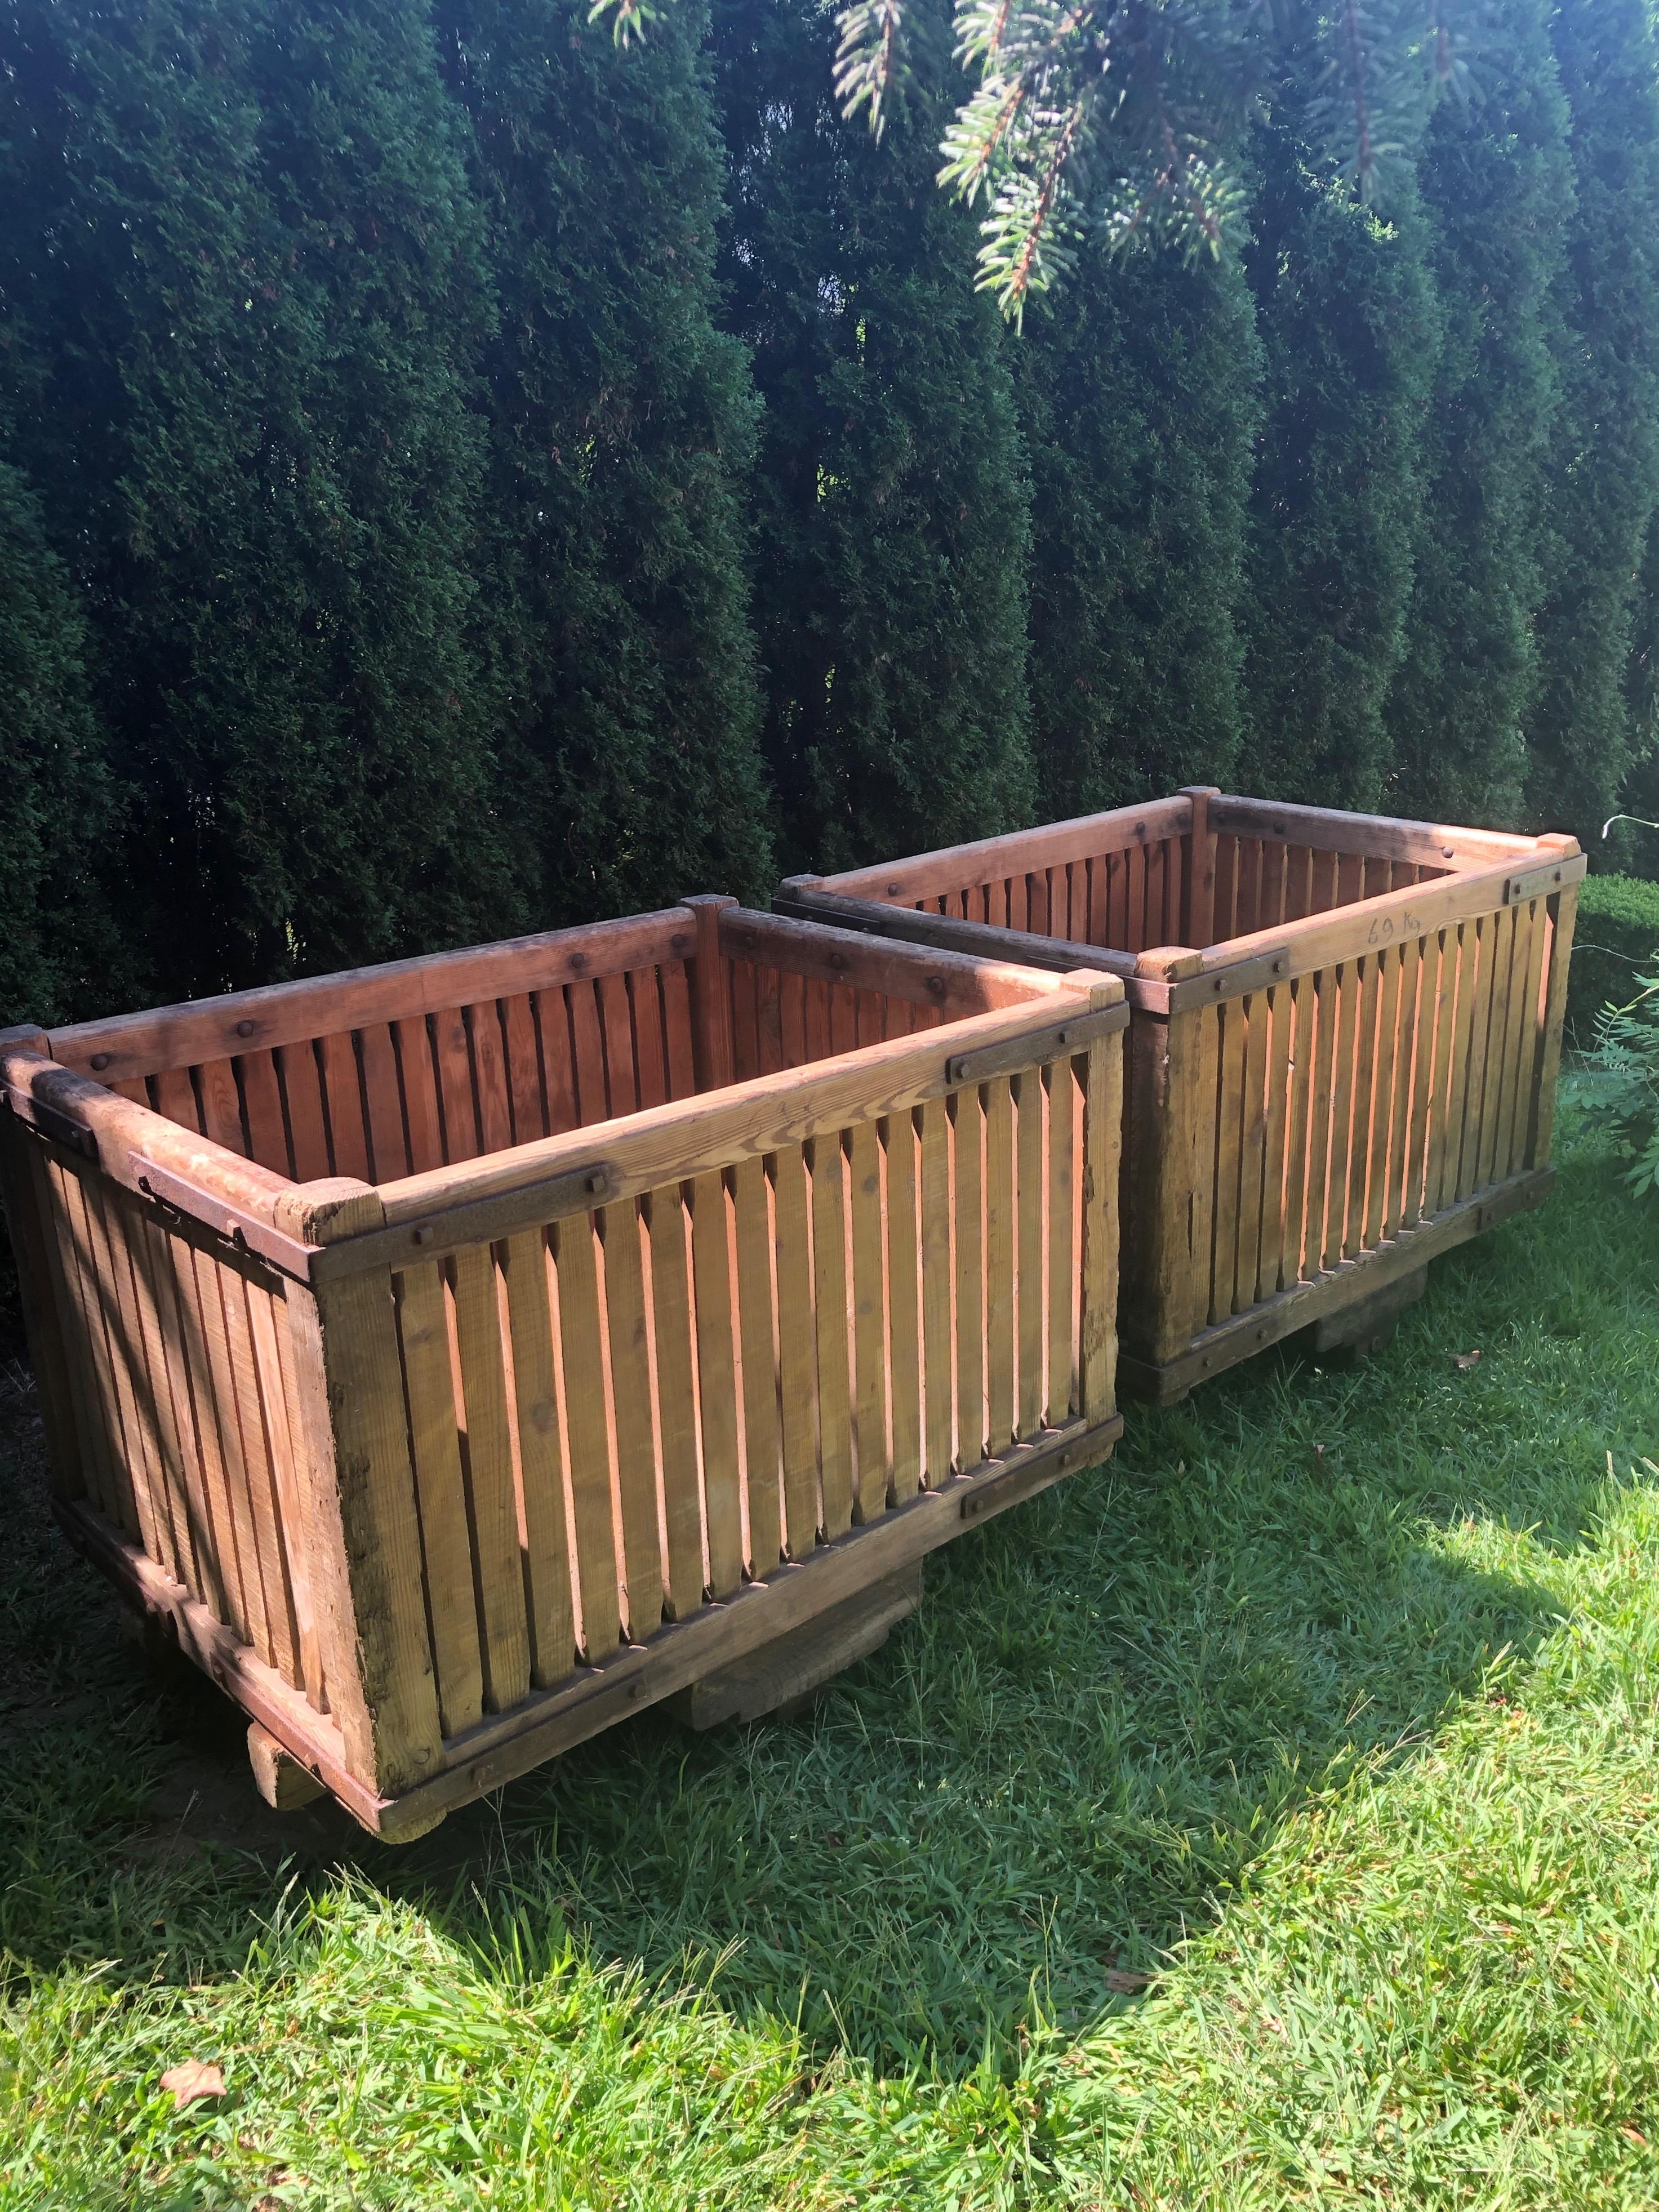 We bought these wonderful pine laundry bins on wheels with the idea of using them as massive planters. In great condition, and with their original hardware, they could easily be converted into planters with the addition of custom fiberglass liners